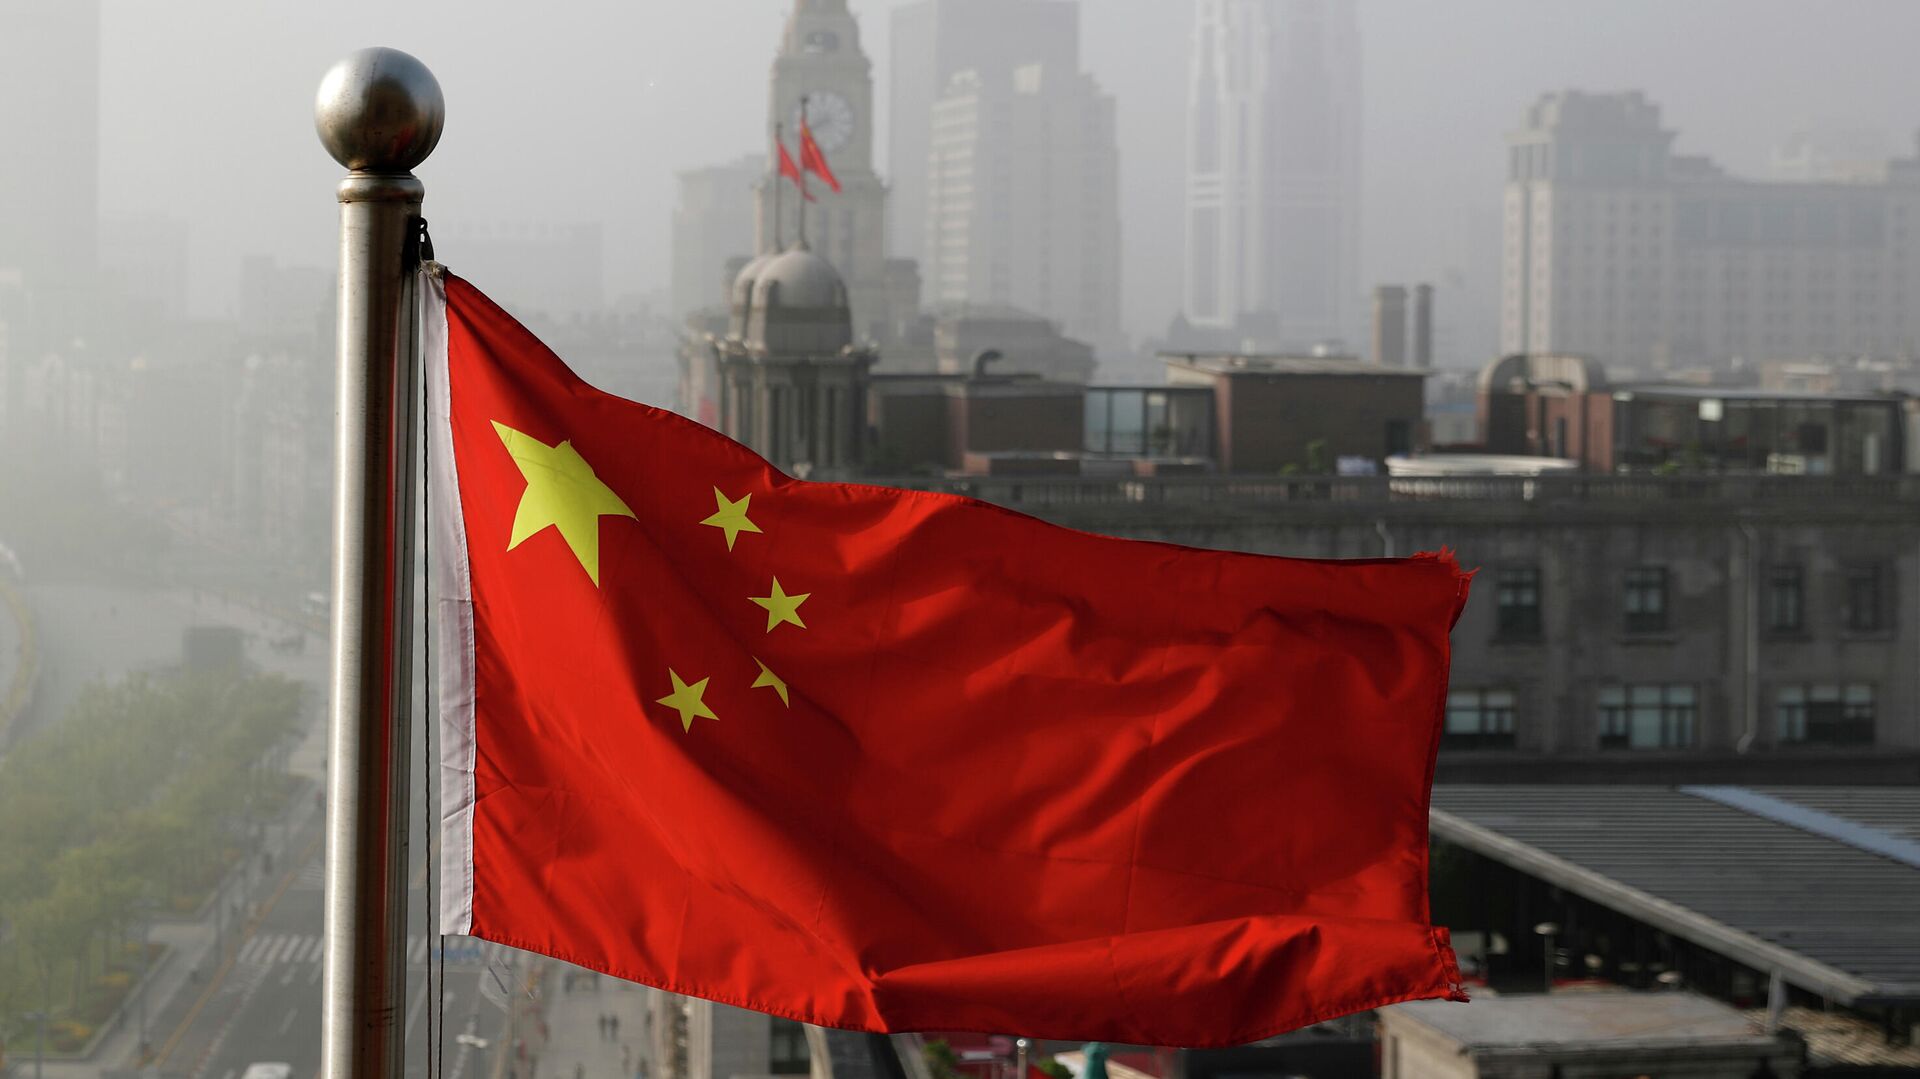 FILE - In this April 14, 2016 file photo, a Chinese national flag flutters against the office buildings in Shanghai, China - Sputnik International, 1920, 11.10.2021